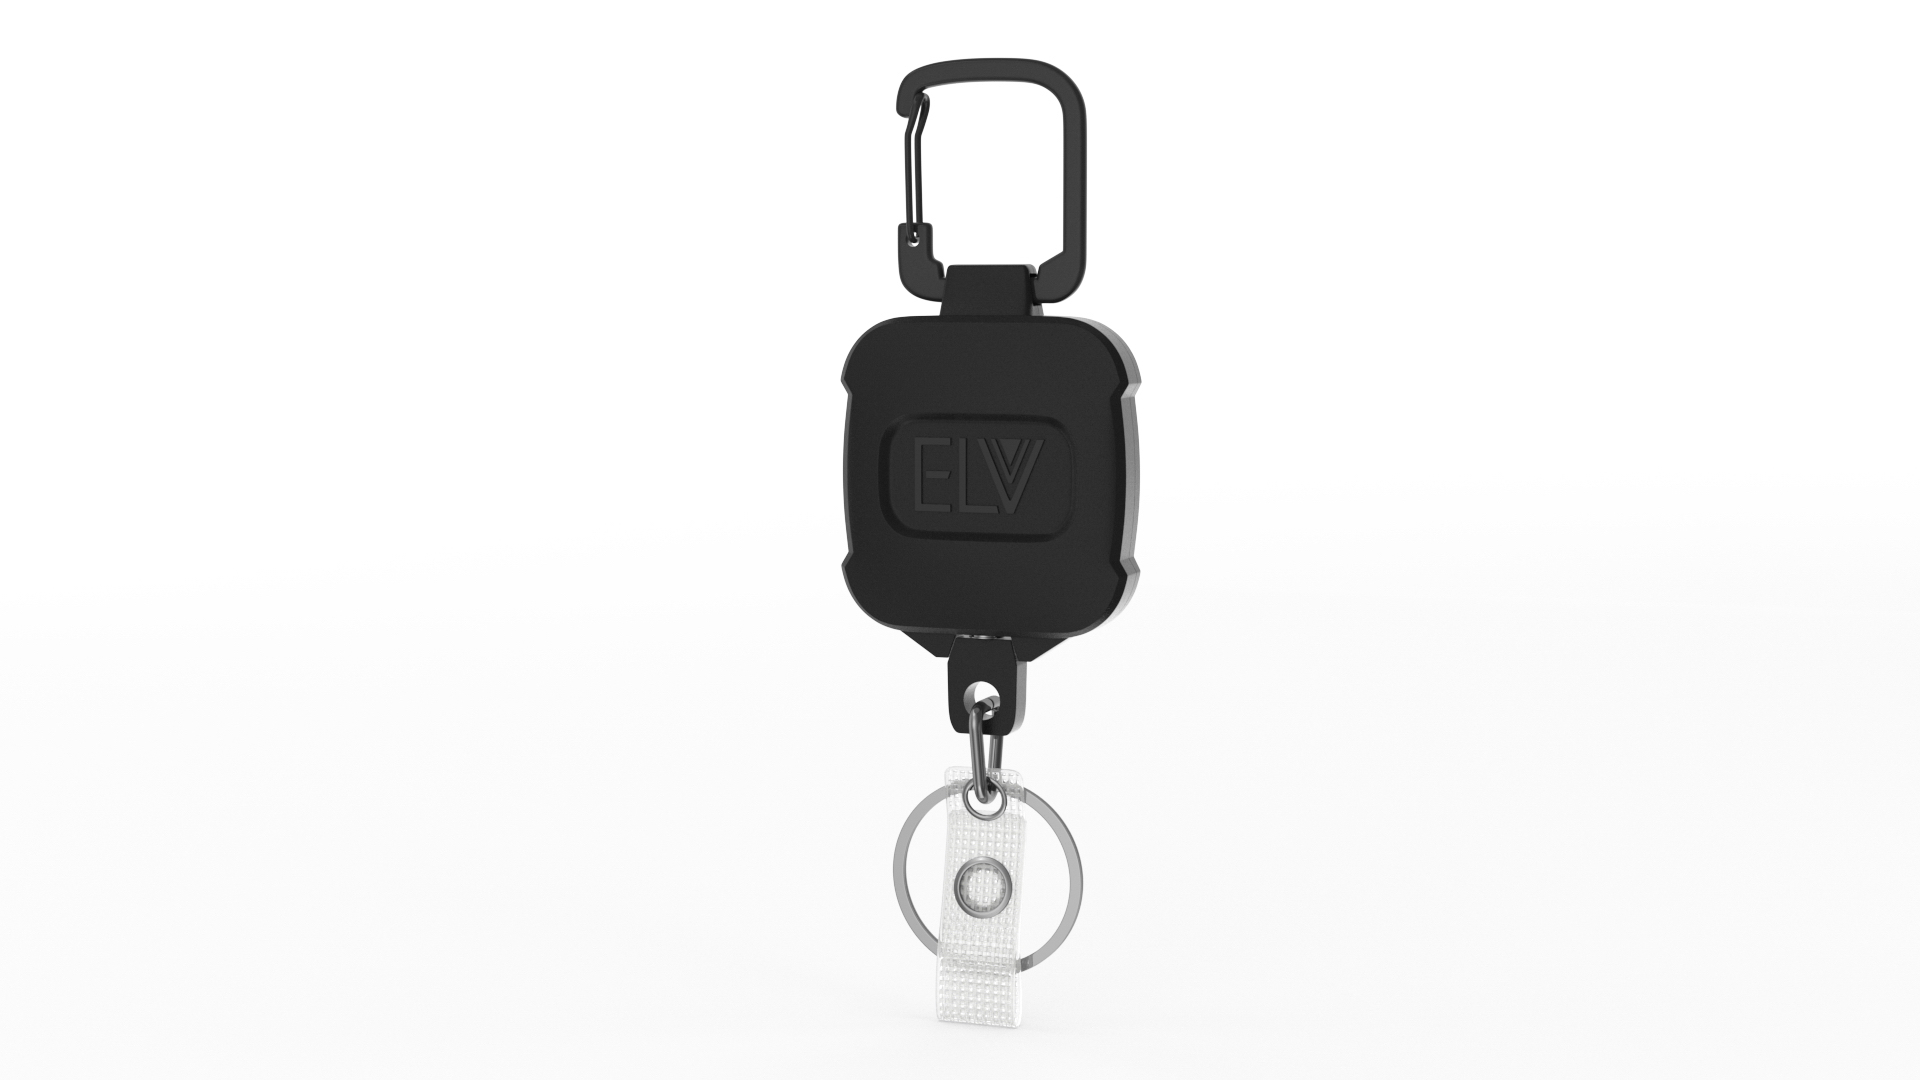  1 Pack ELV Retractable ID Badge Holder, Retractable